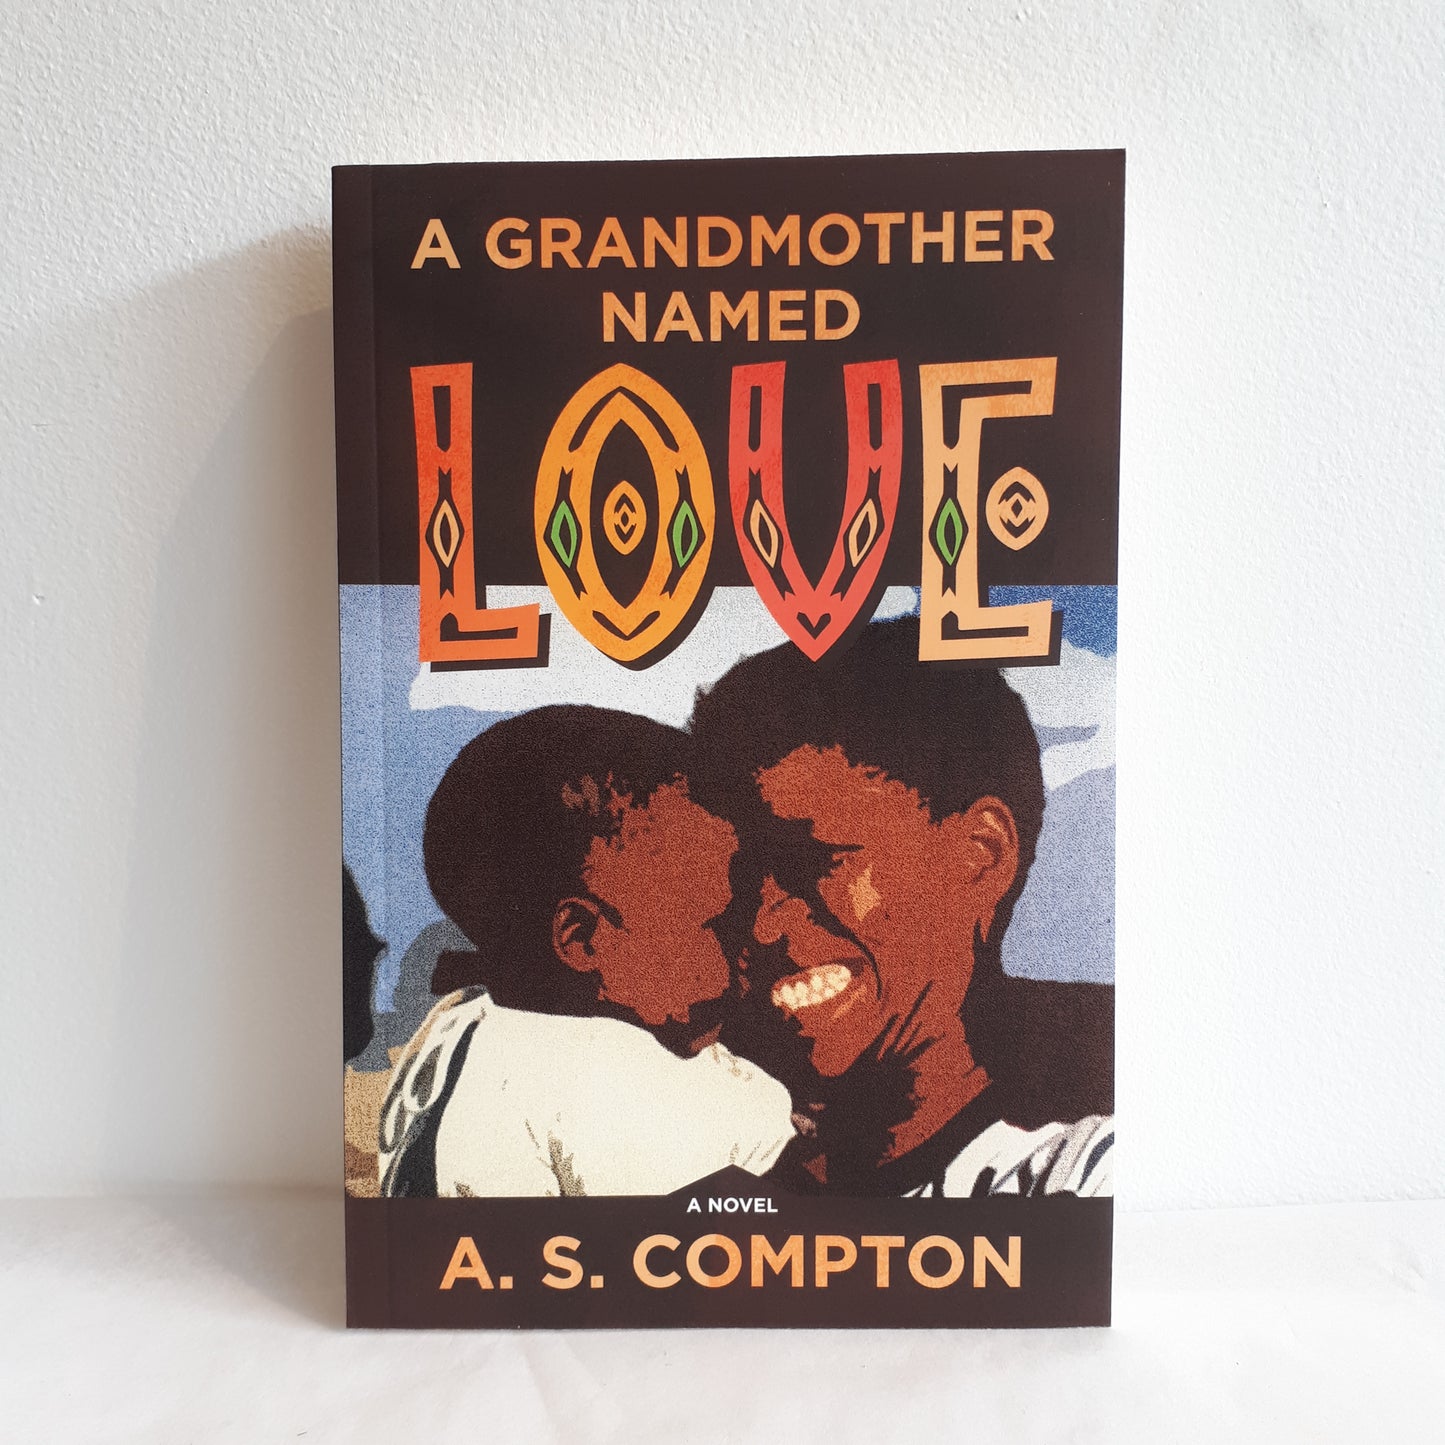 A Grandmother Named Love by A. S. Compton